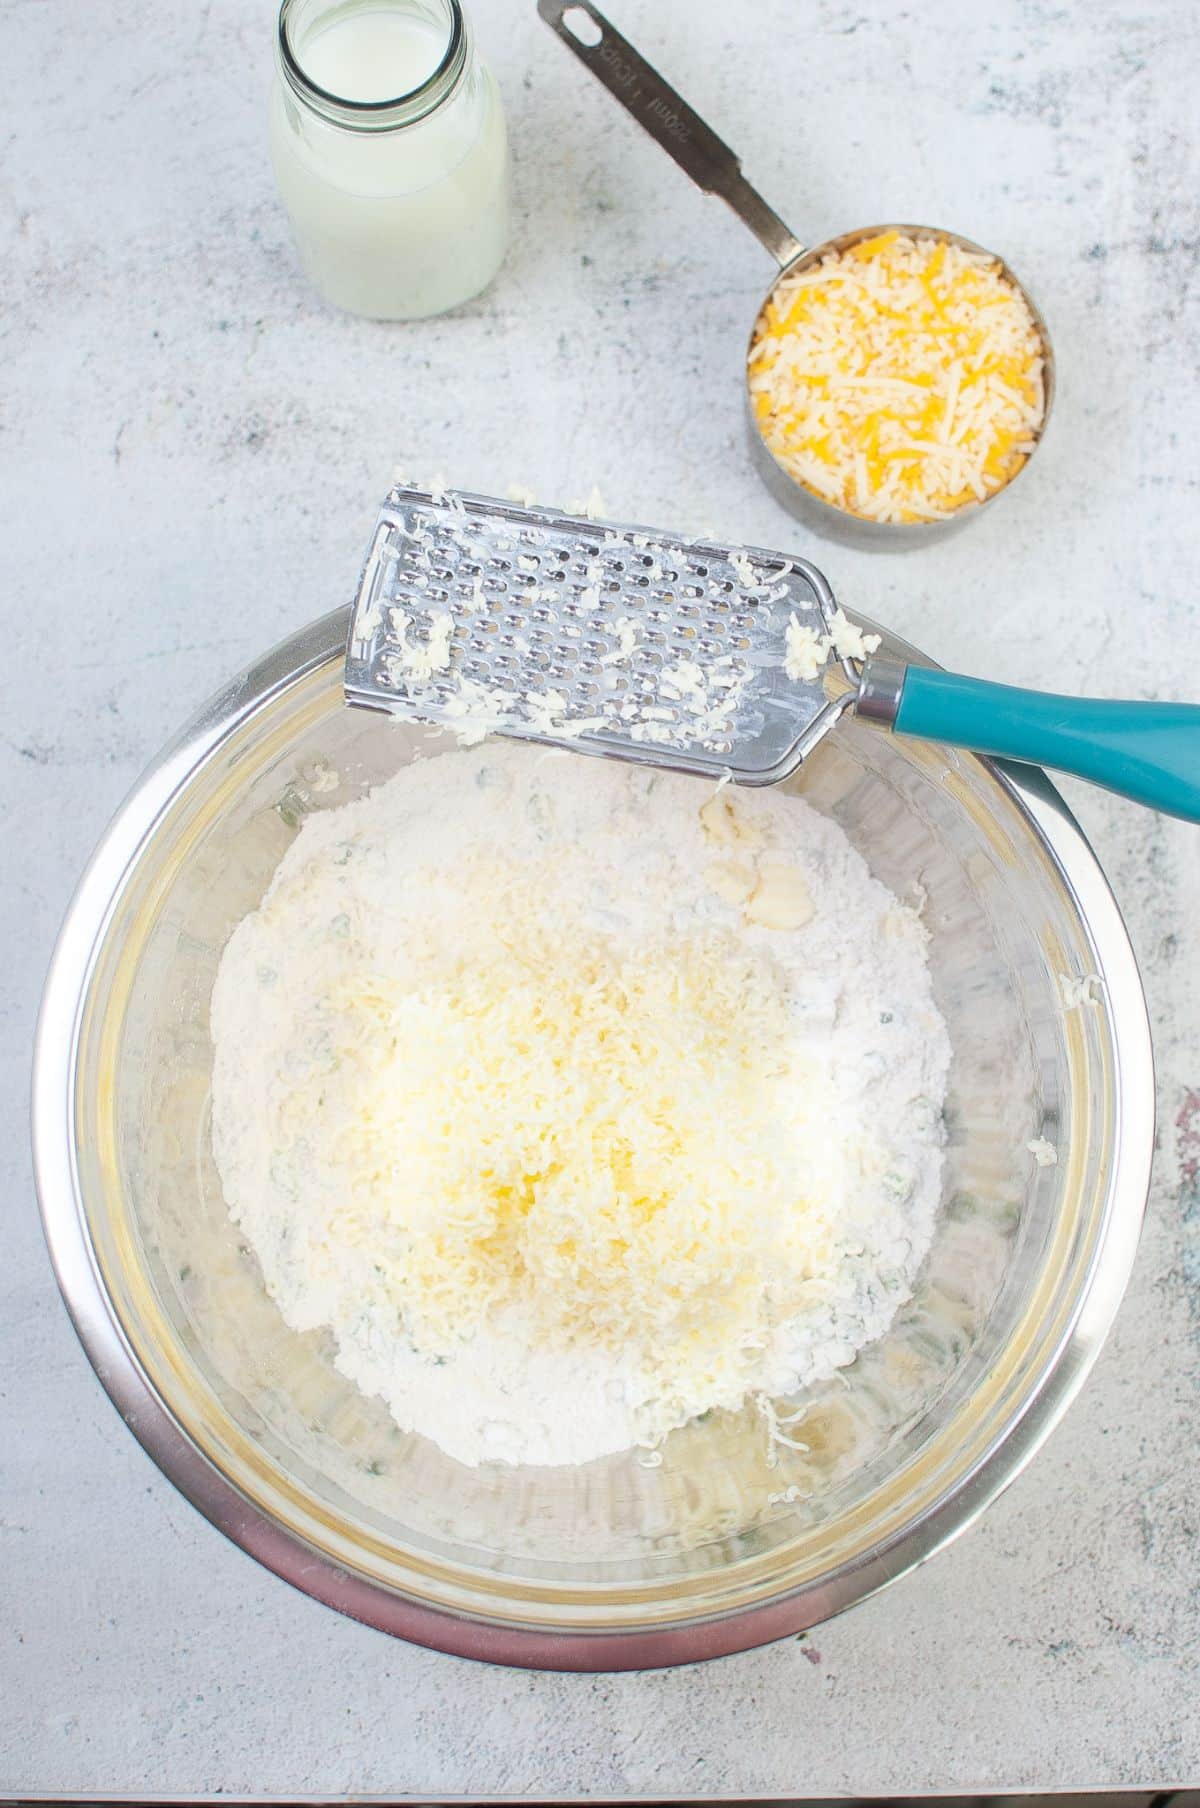 The grated butter is added to the flour mixture.